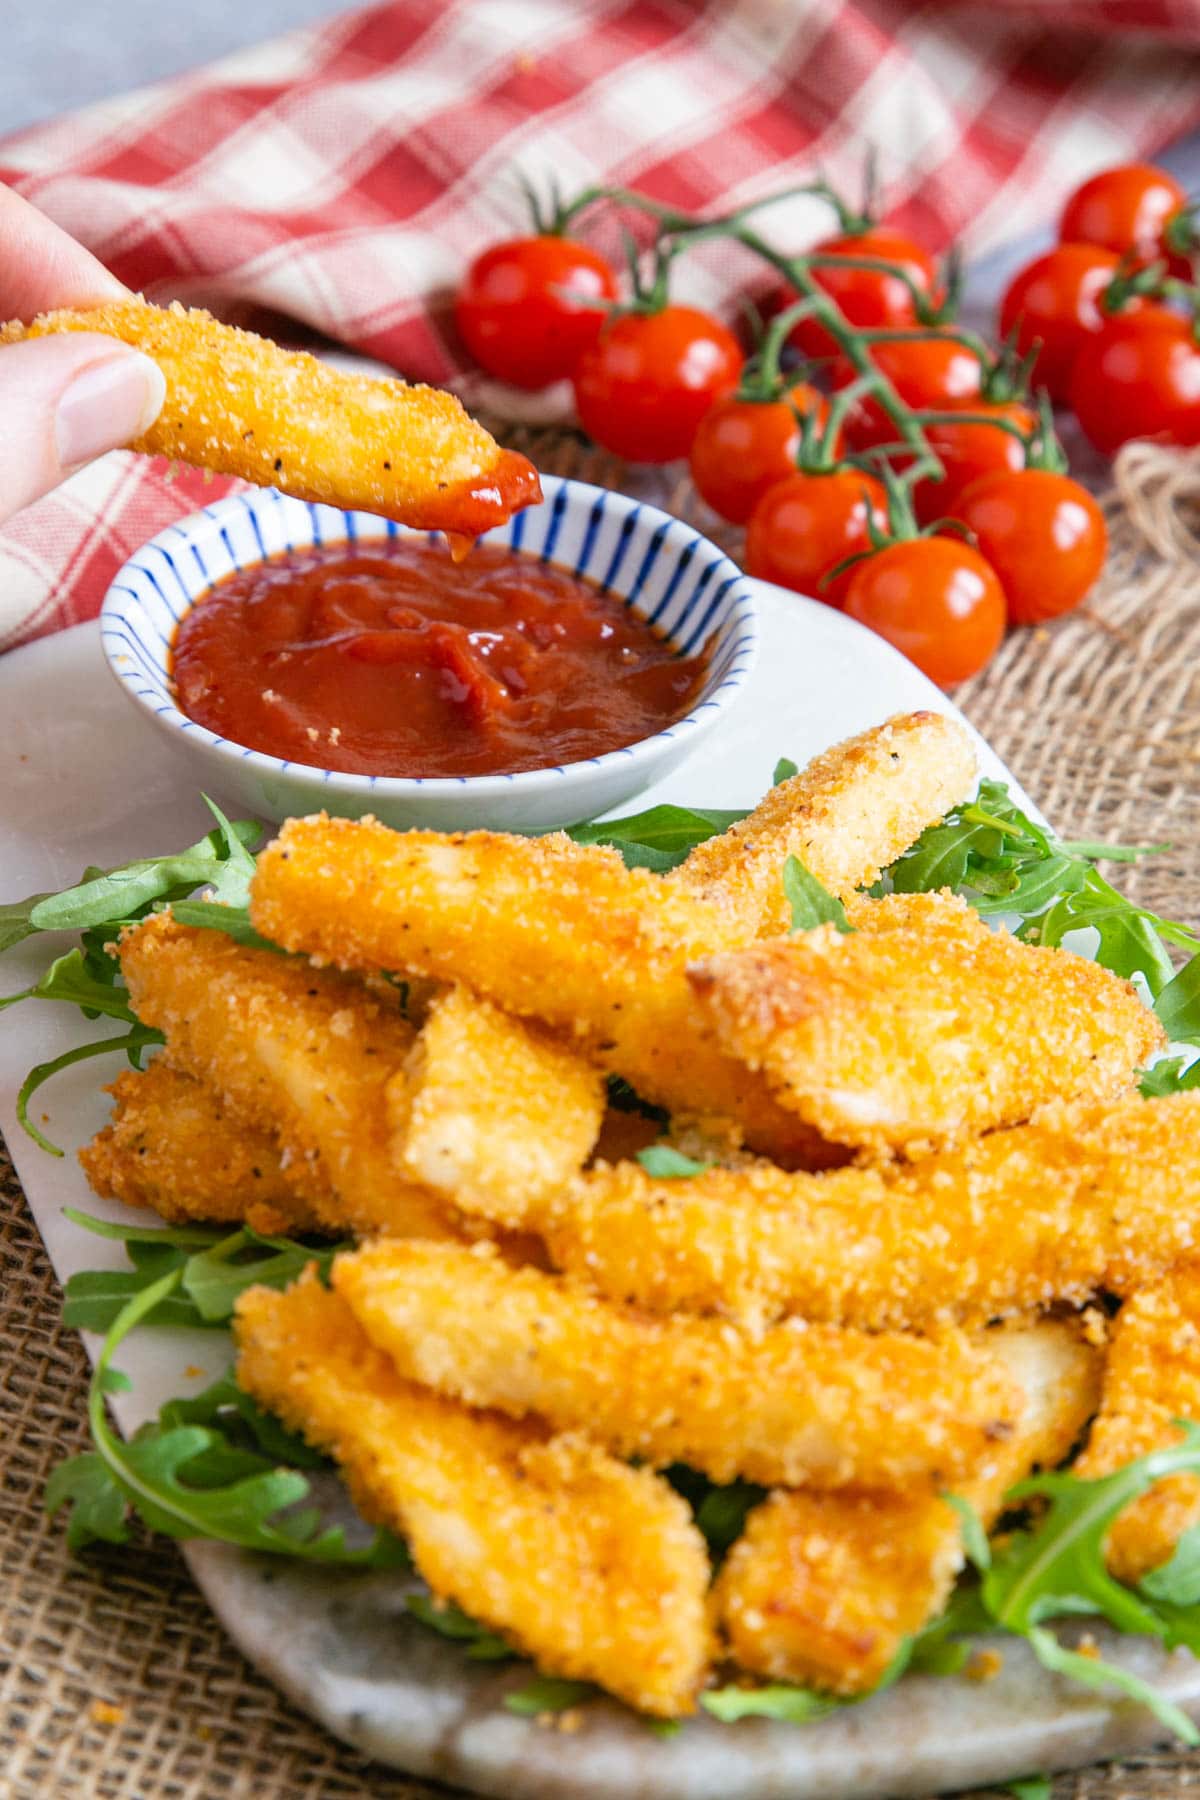 Dipping the first crunchy golden fry into a spicy tomato ketchup.